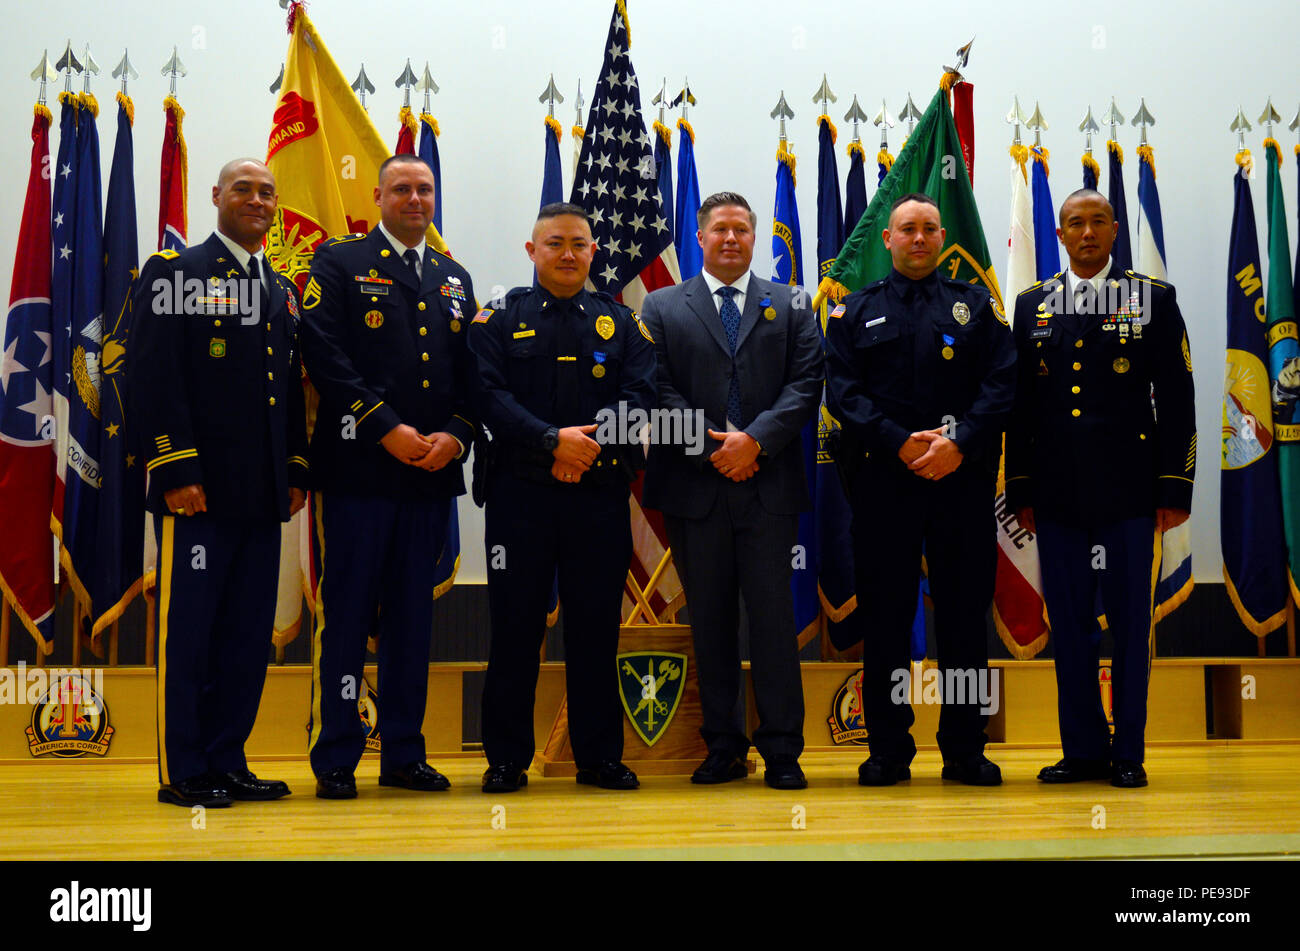 (From left to right) Col. Christopher A. Burns, commander, 42nd Military Police Brigade and director of Emergency Services for JBLM, Staff Sgt. Scott Franz, 504th Military Police Battalion, 42nd MP Brigade, Lt. Marcus Todd, Detective James Earnest, Officer James Smet, Department of the Army civilian police officers, and Command Sgt. Maj. Jon D Matthews, 42nd Military Police Brigade, all pose for a group photo during an awards ceremony at the French Theater on Joint Base Lewis McChord, Wash., Nov. 10, 2015. Franz and the three DA civilian police officers were all awarded for their heroism and v Stock Photo